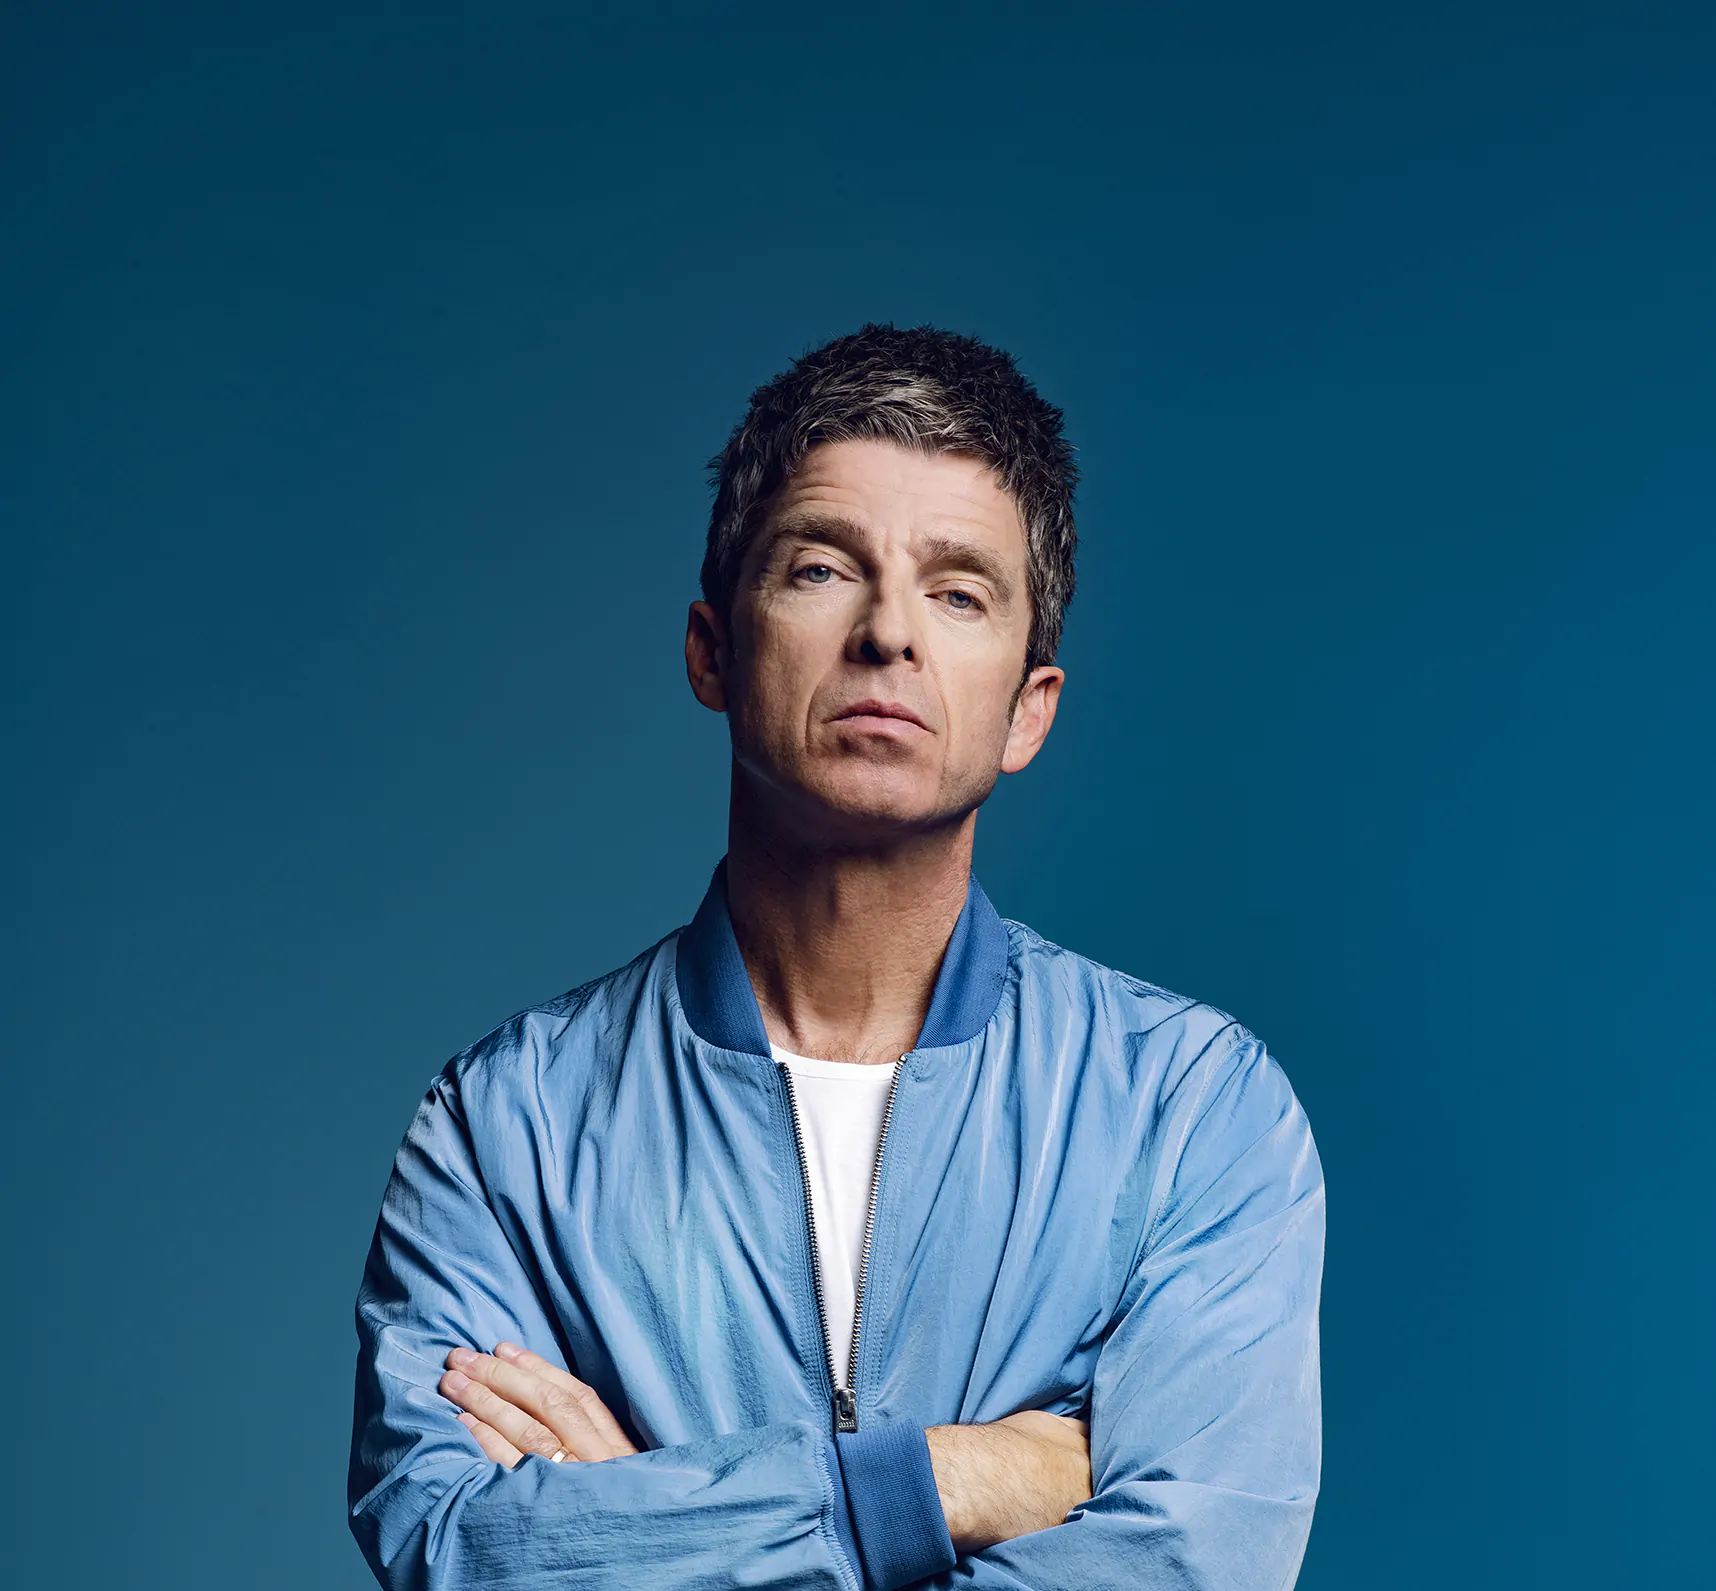 NOEL GALLAGHER’S HIGH FLYING BIRDS unveil new track ‘Flying On The Ground’ ahead of this week’s Best Of album release